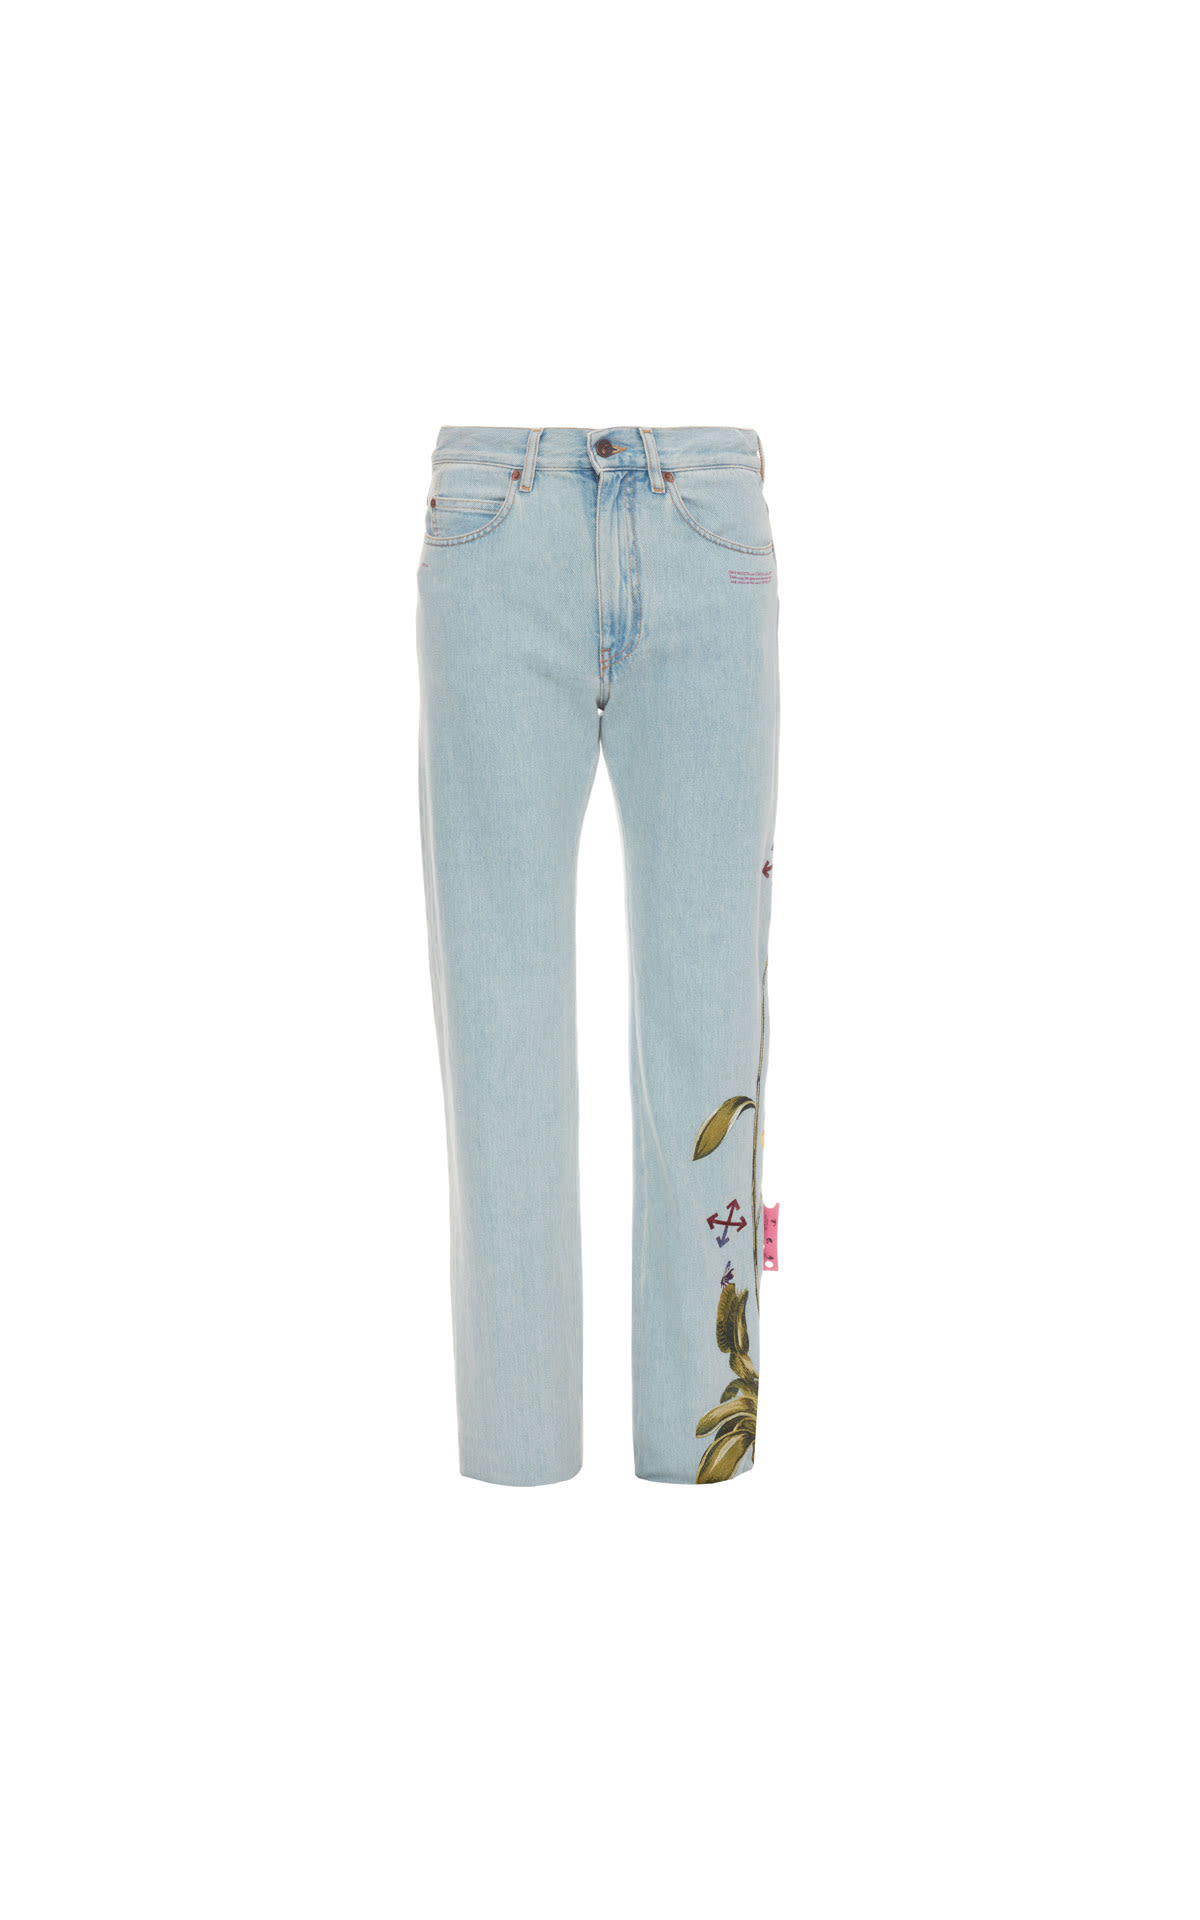 Off-White Embroidered Jean from Bicester Village